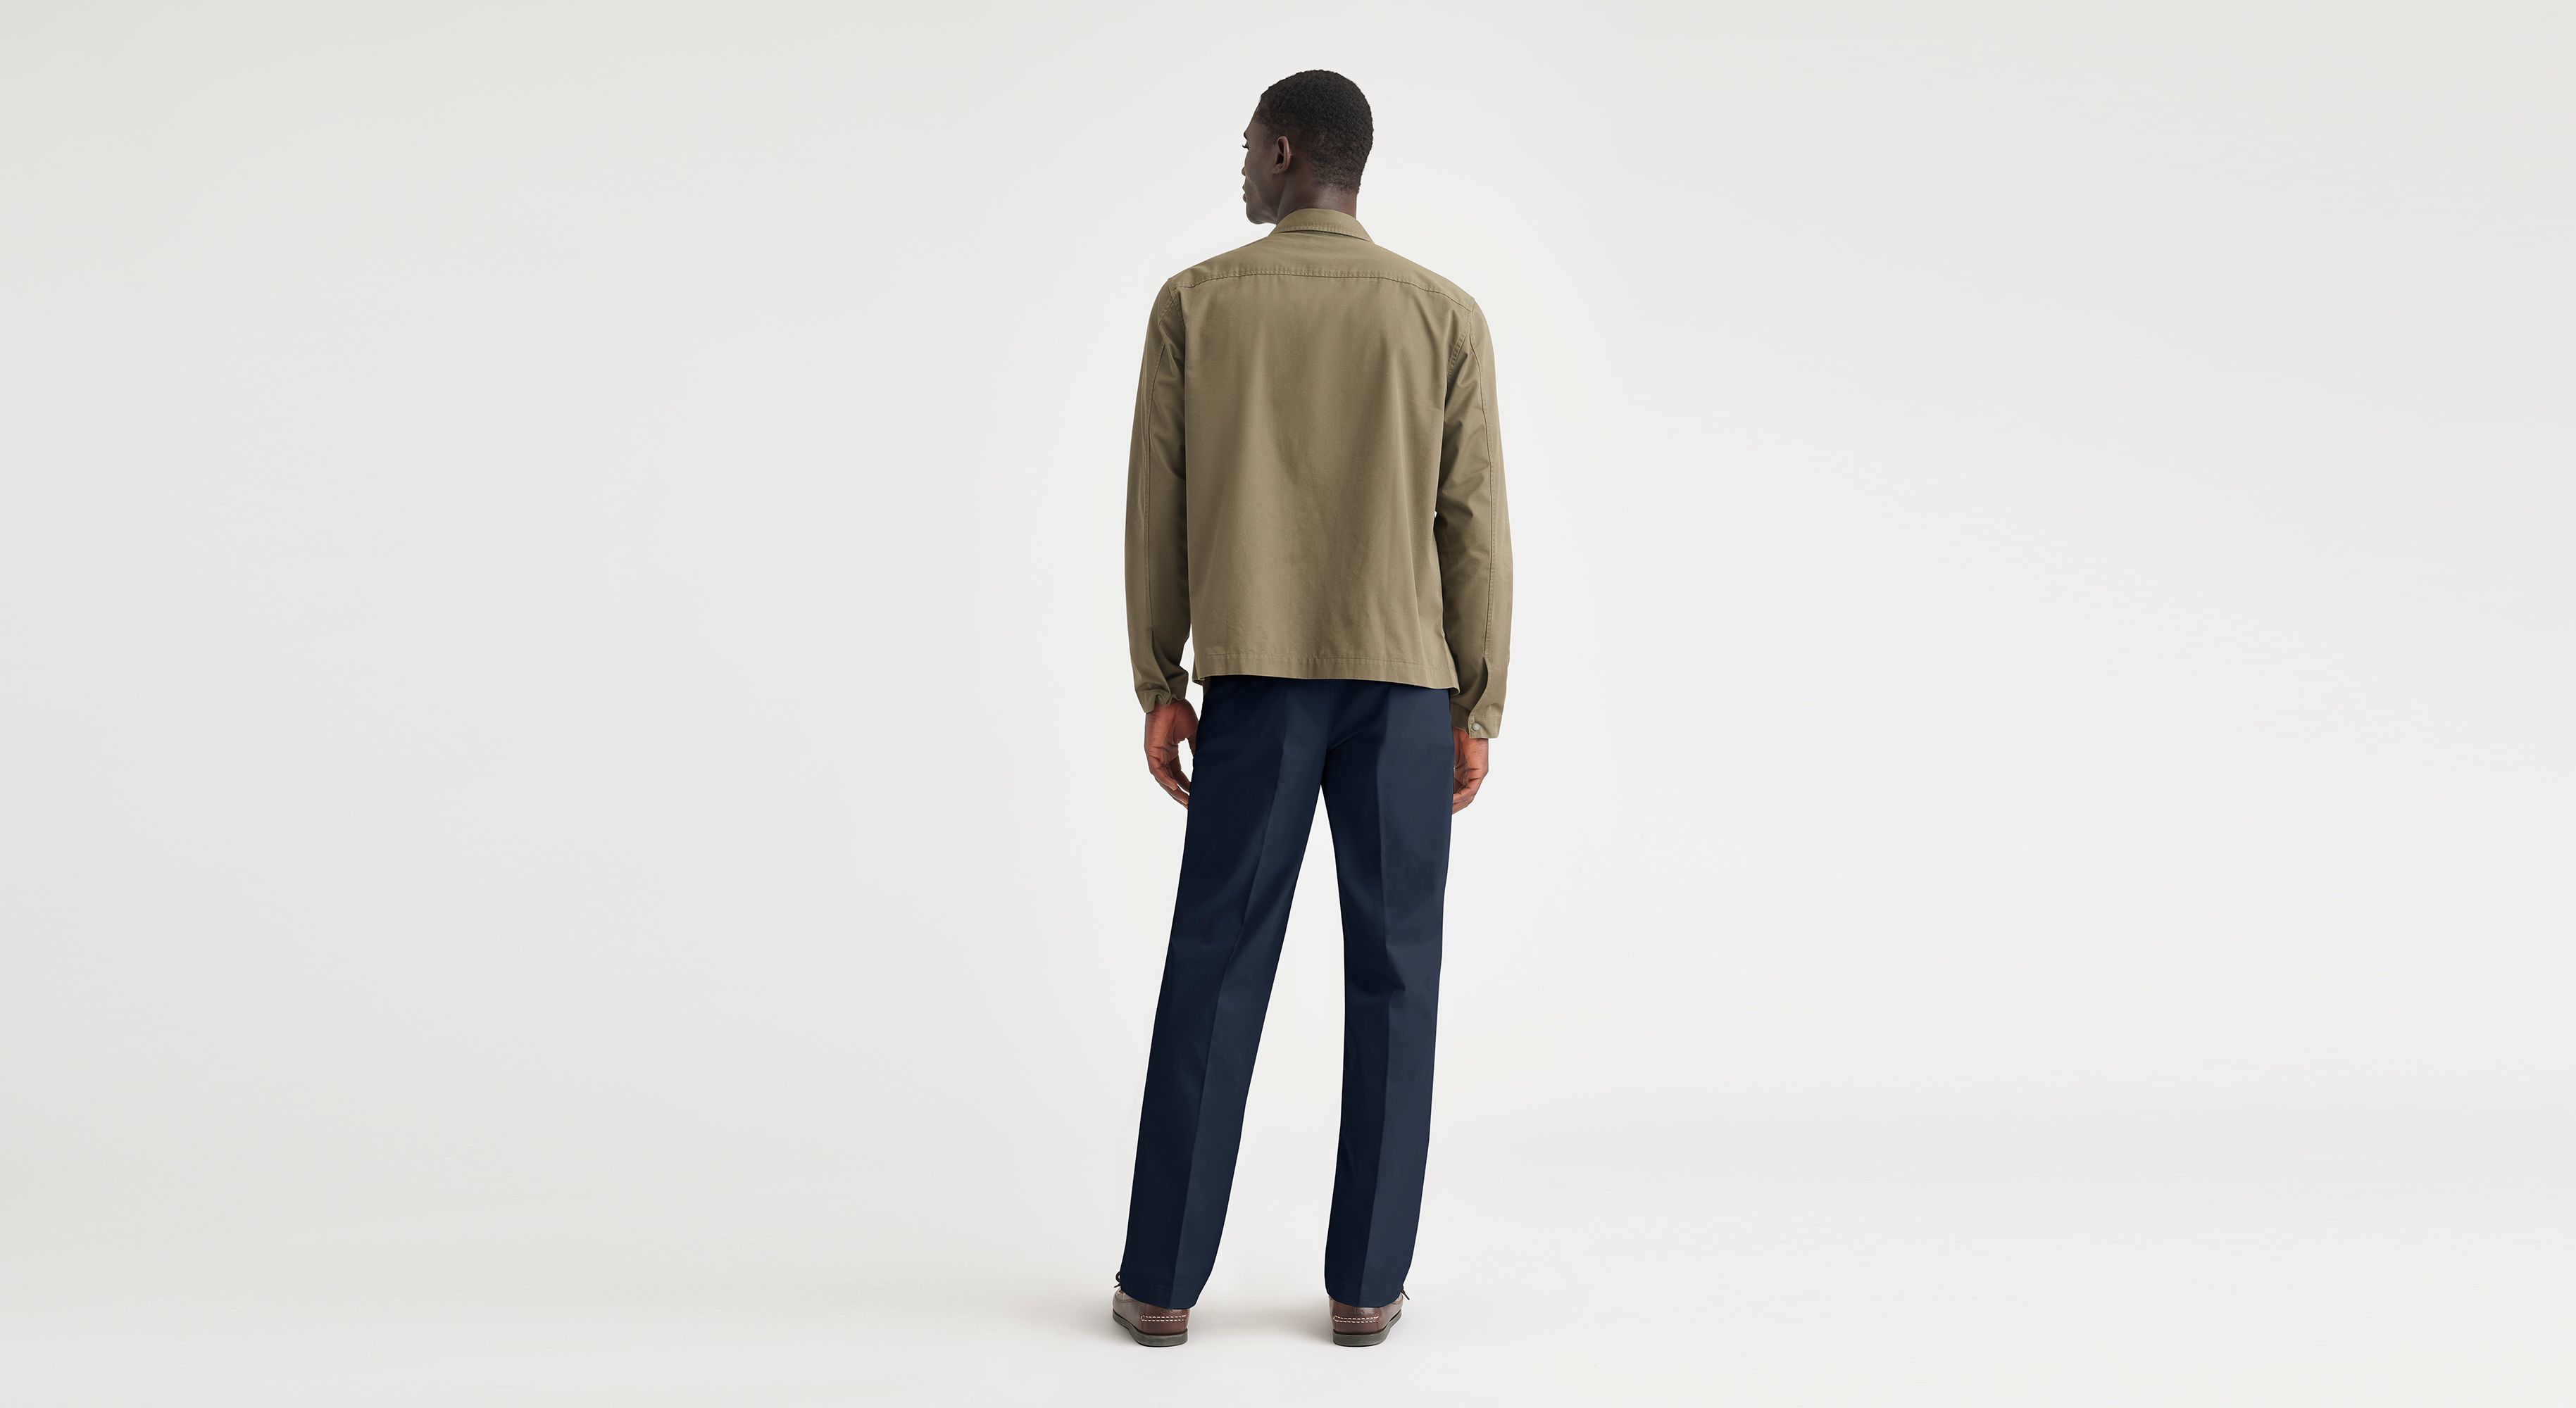 Essential Stretch Twill Pant, Timber